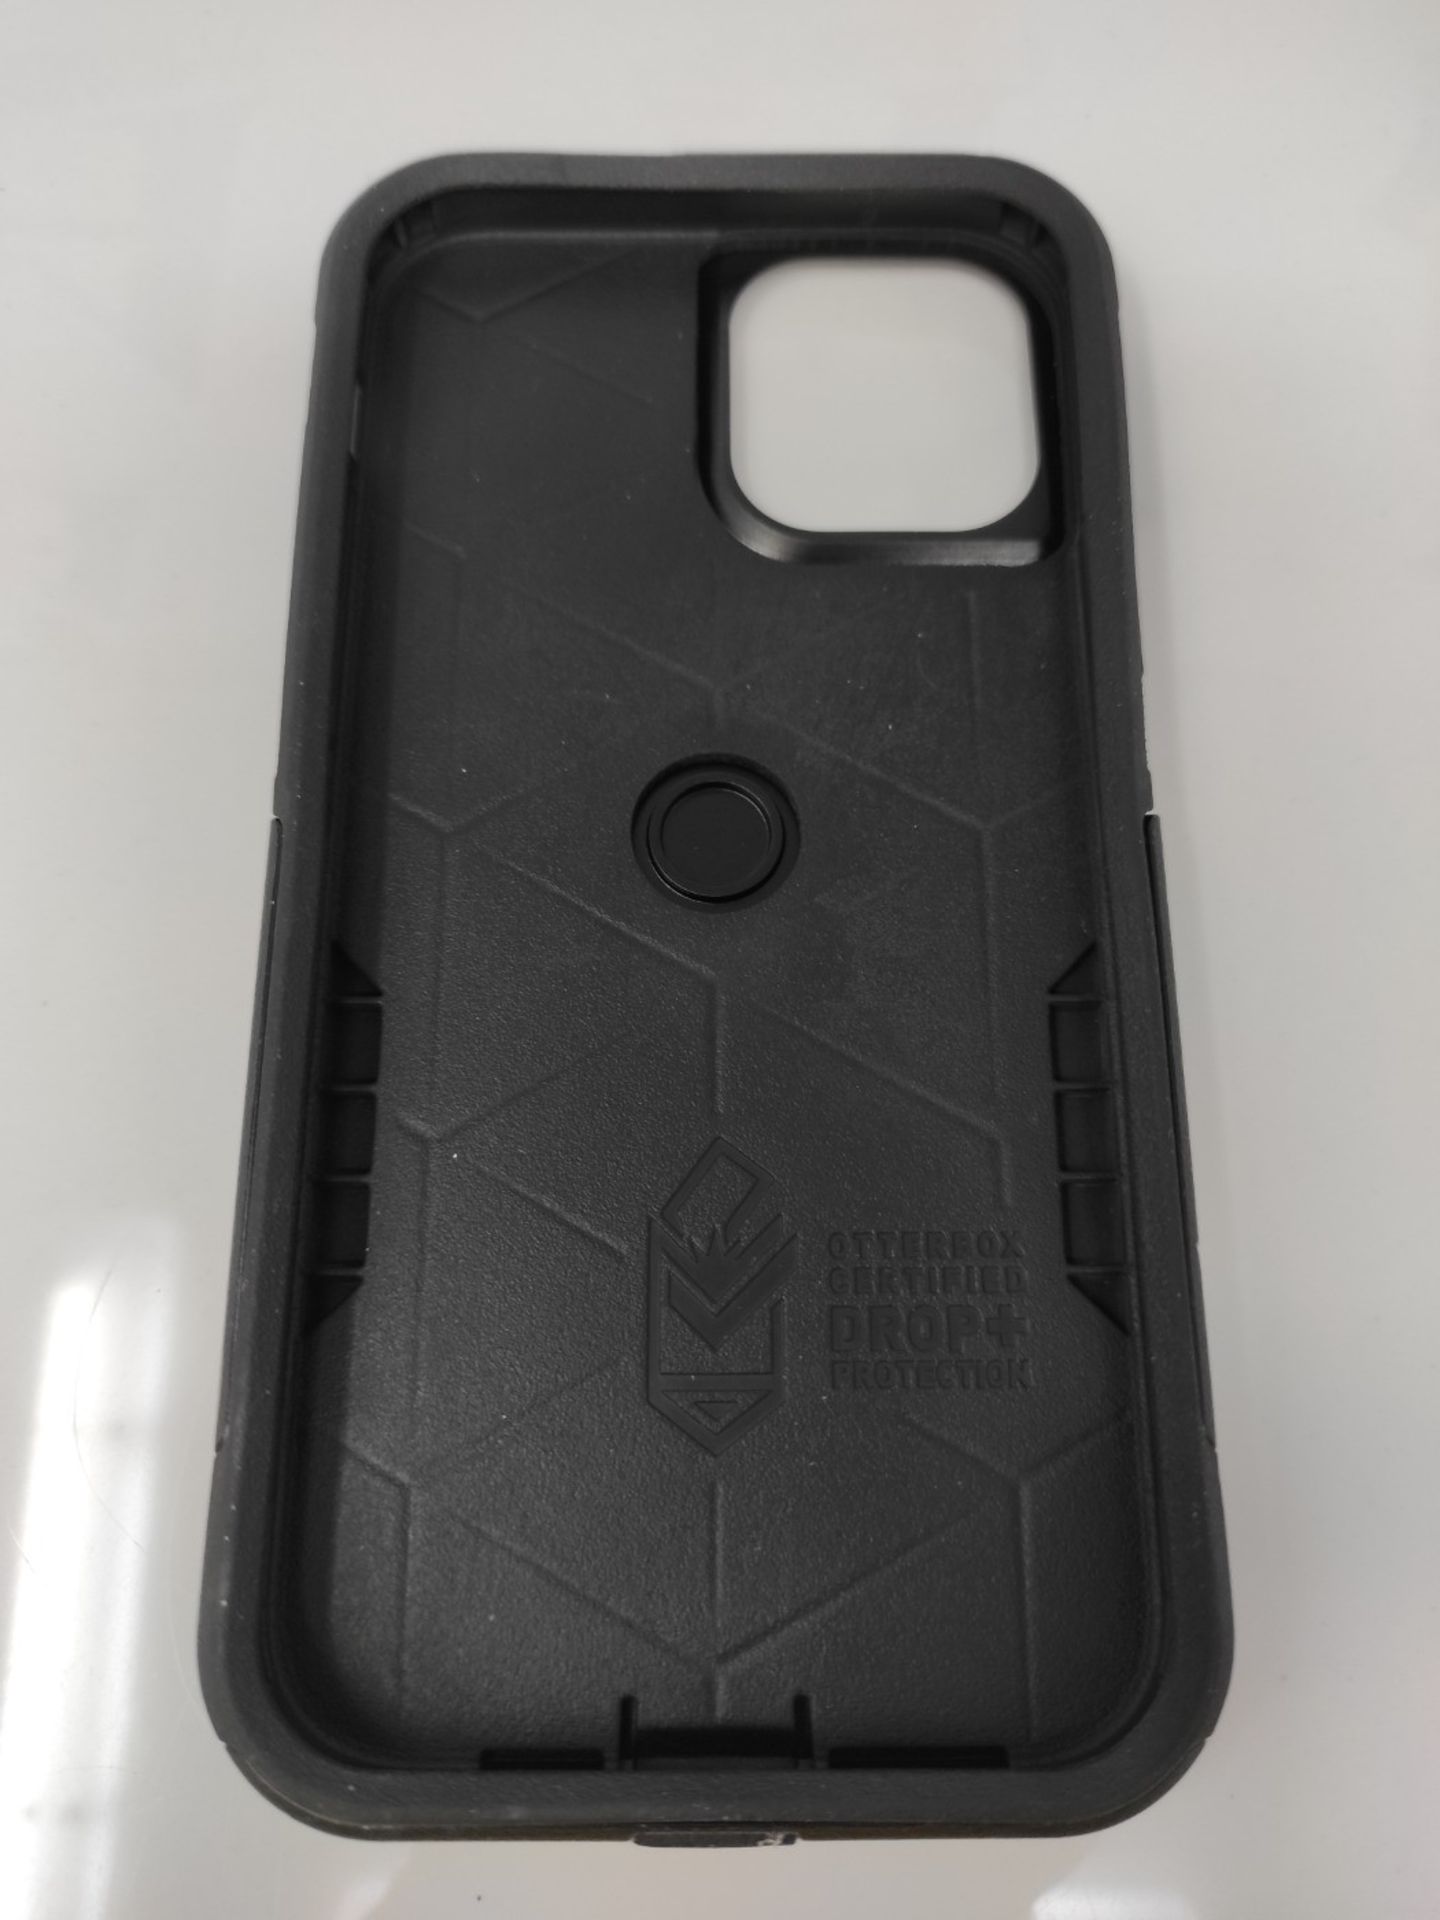 OtterBox Commuter Case for iPhone 12 / iPhone 12 Pro, Shockproof, Drop proof, Rugged, - Image 3 of 3